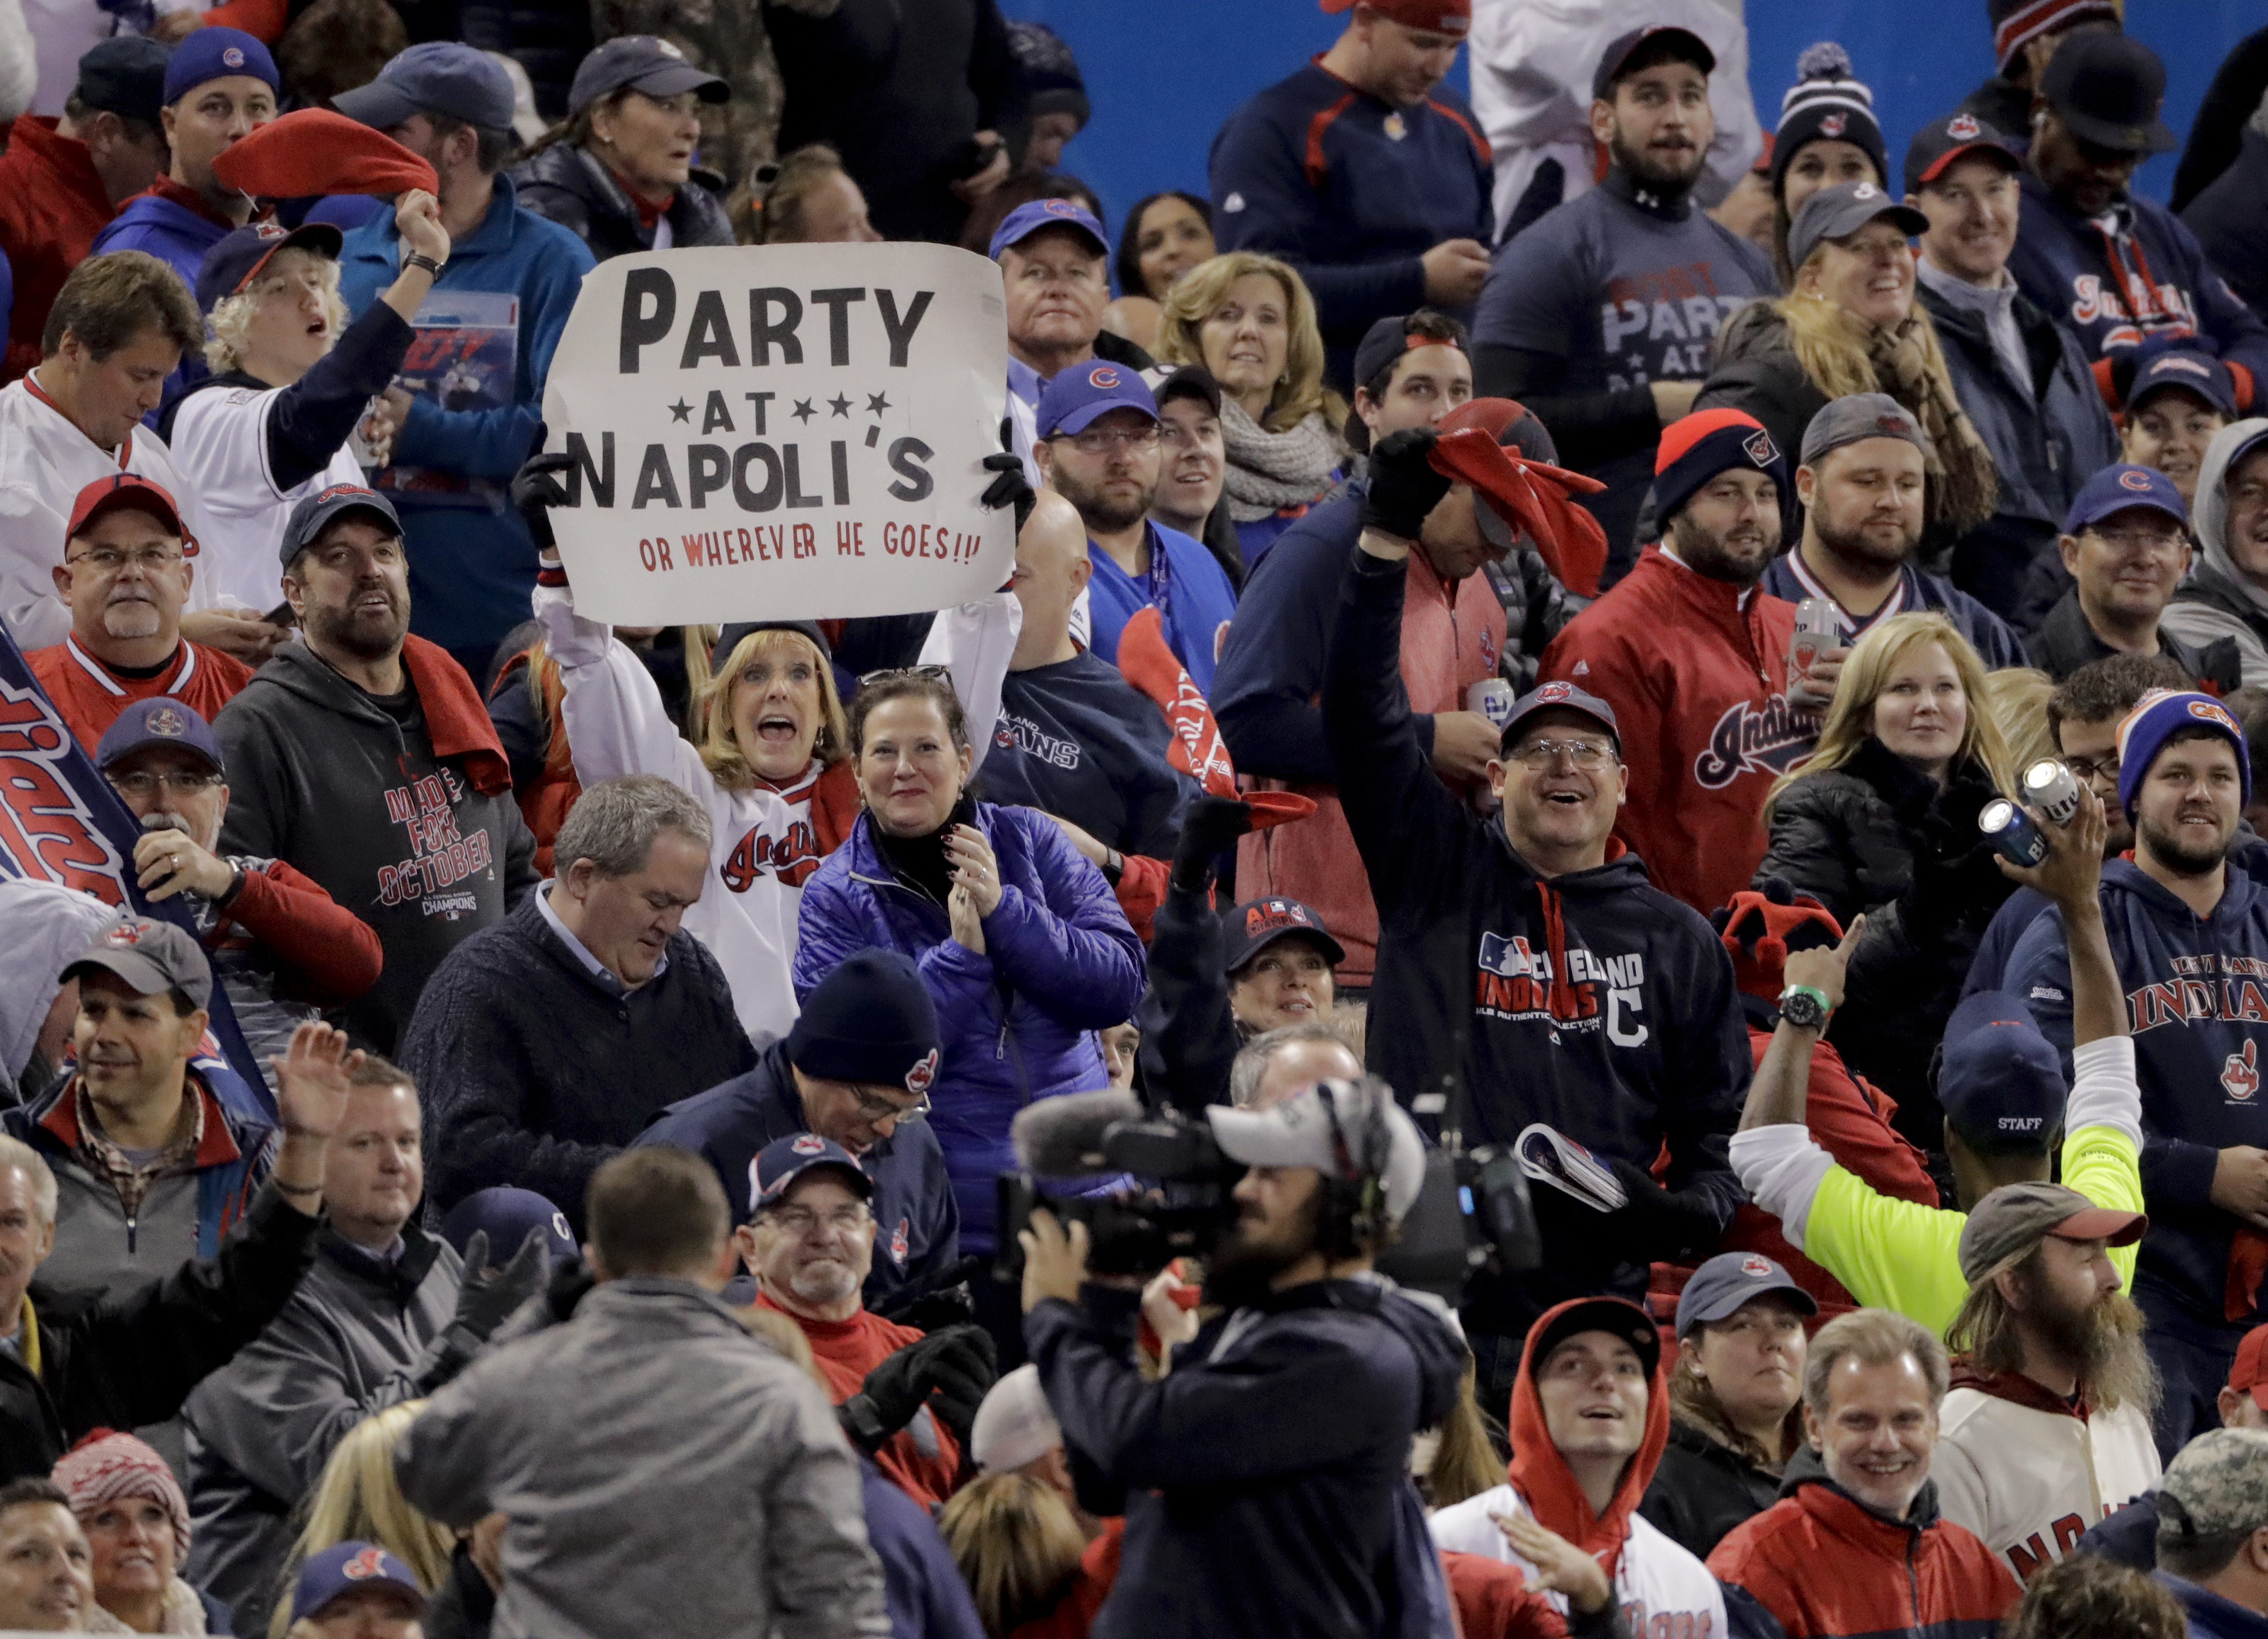 Fans cheer during the third inning of Game 1 of the Major League Baseball World Series between the Cleveland Indians and the Chicago Cubs Tuesday, Oct. 25, 2016, in Cleveland. (AP Photo/Charlie Riedel)